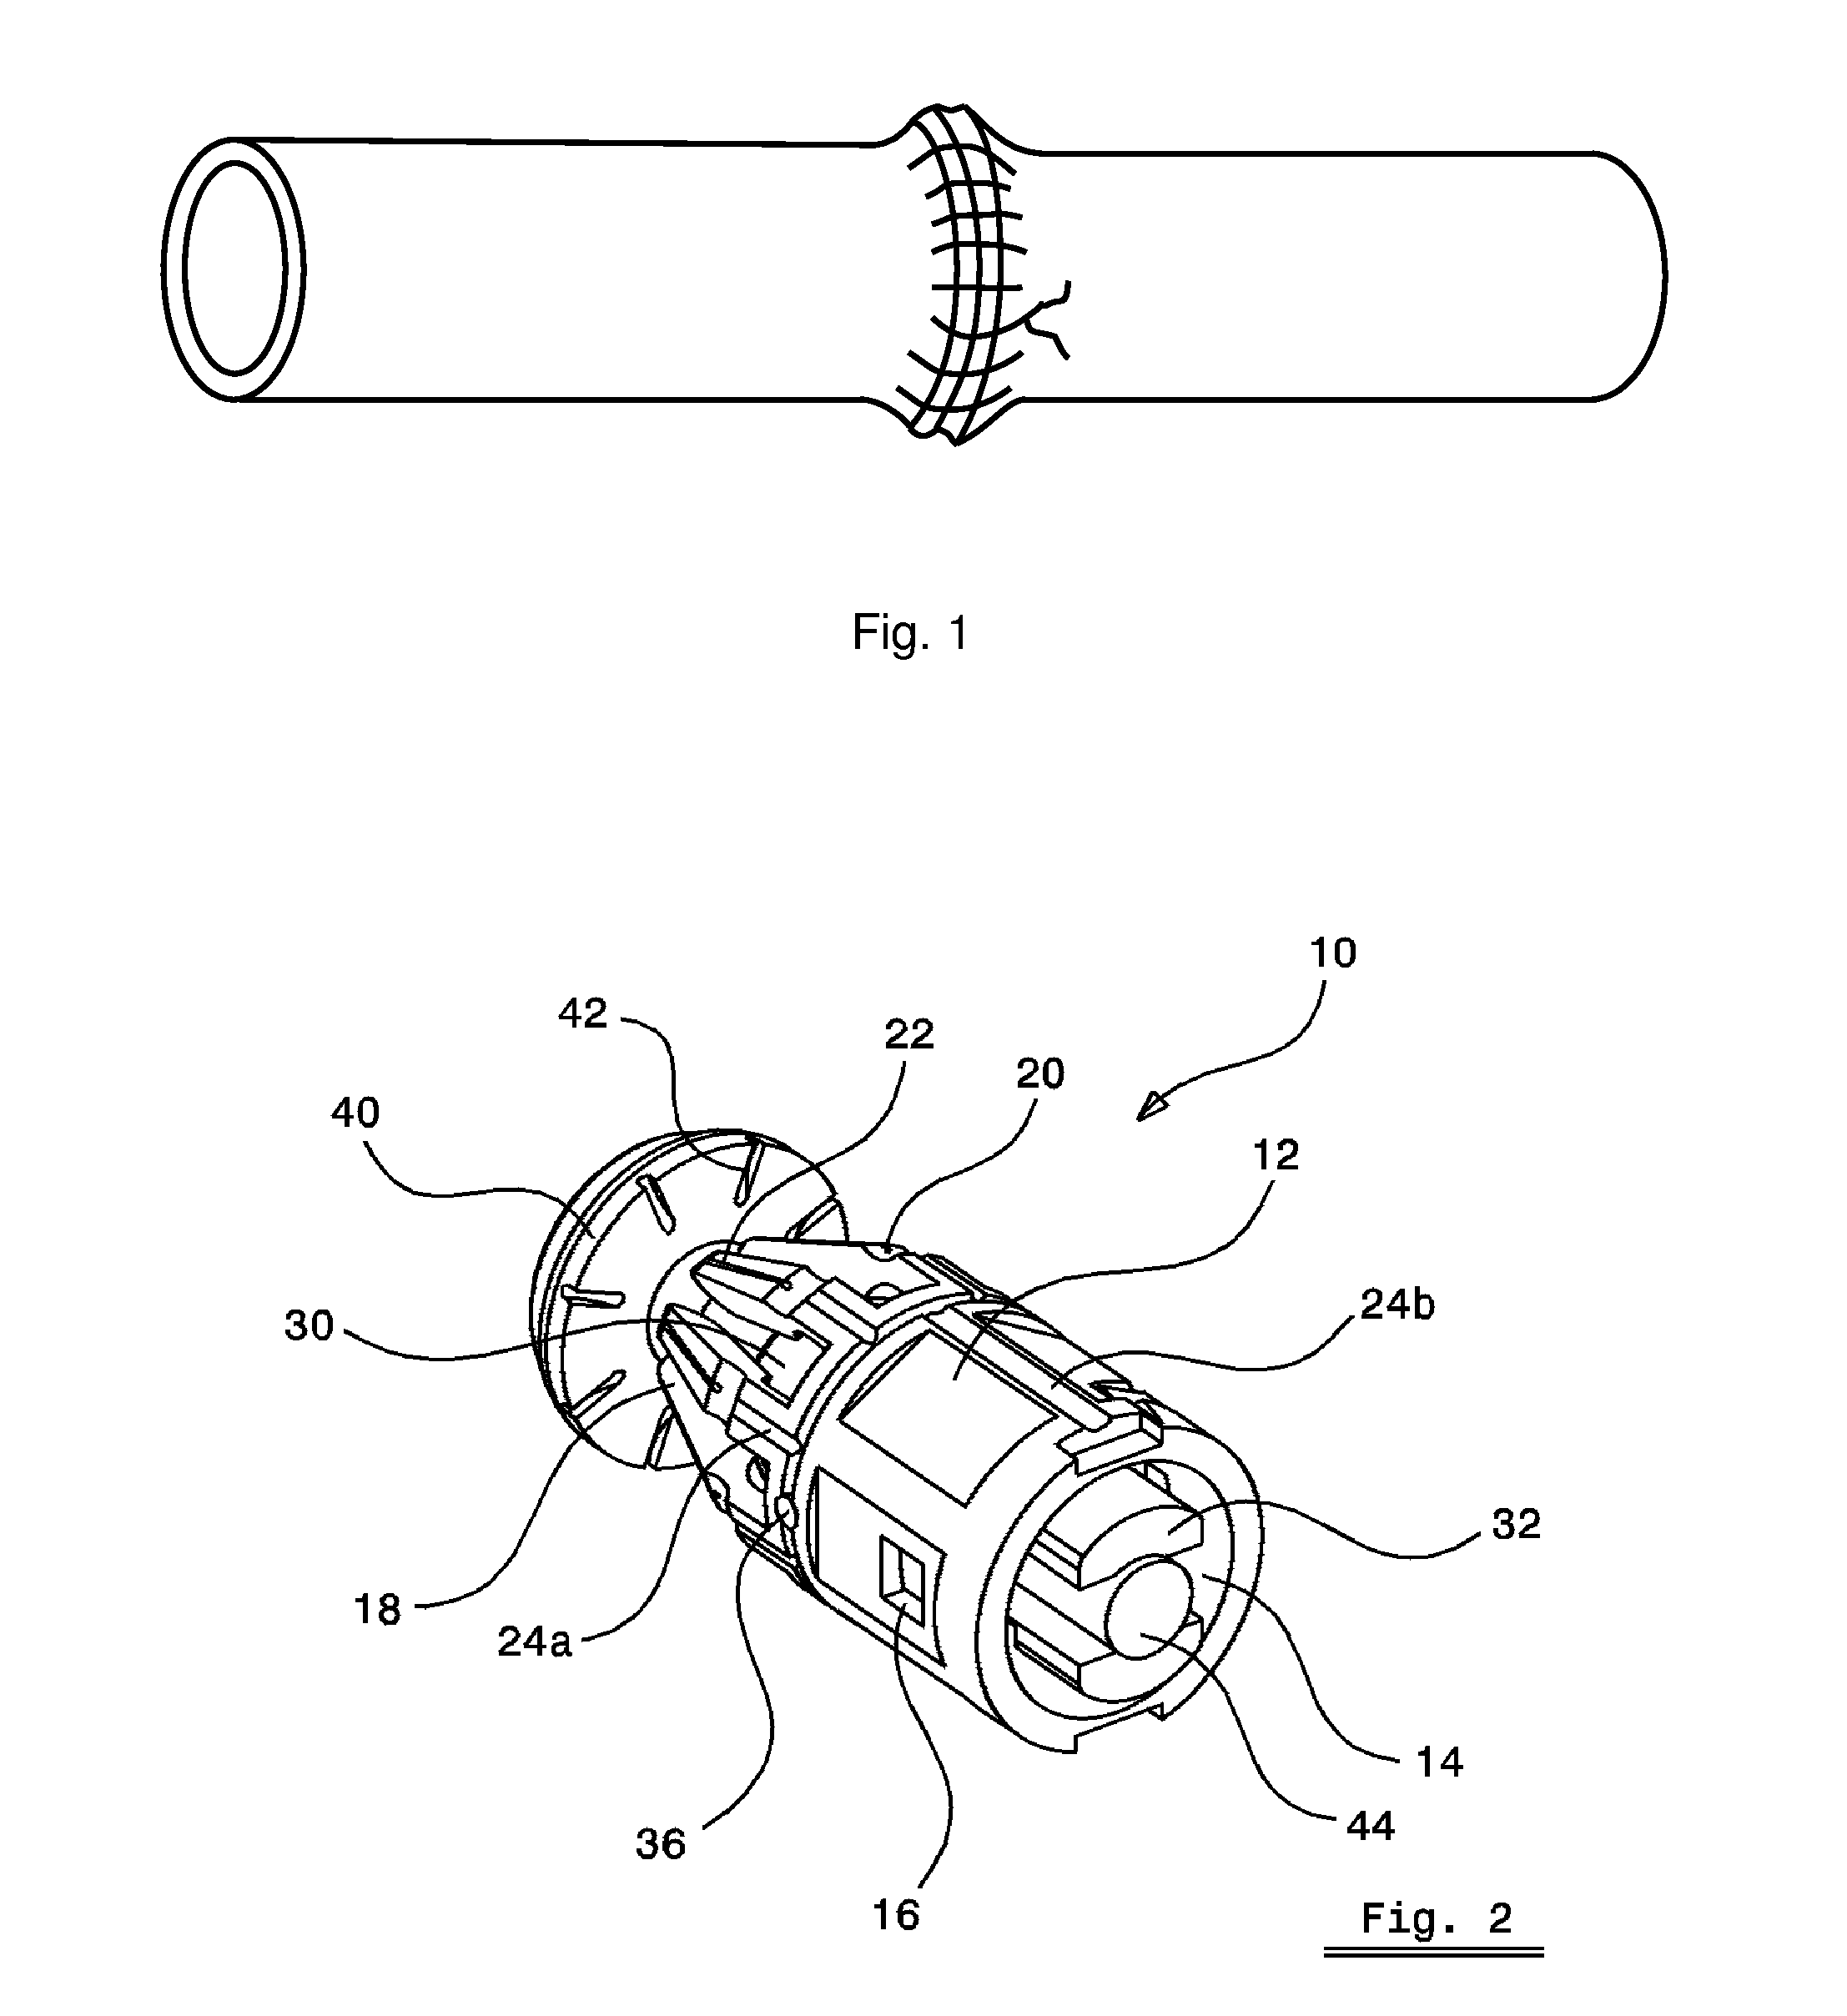 Device for performing end-to-end anastomosis